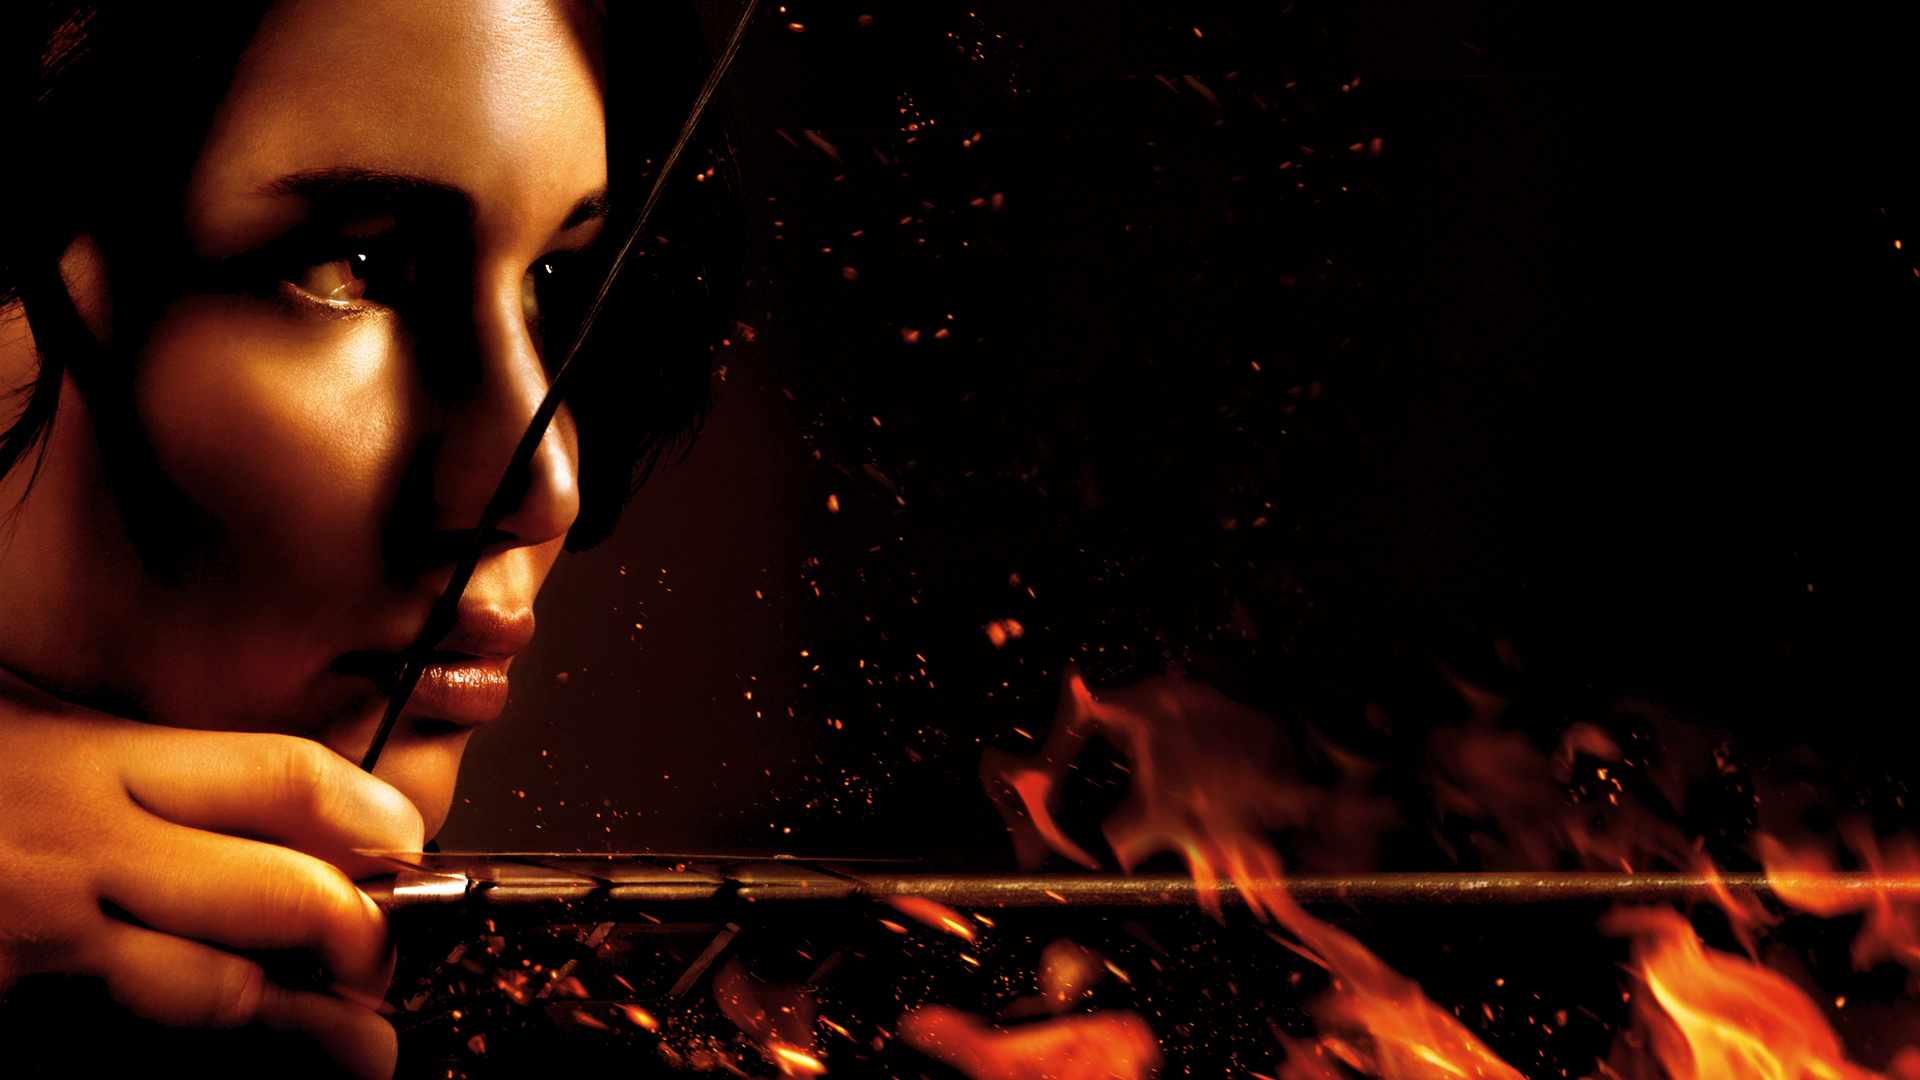 THE HUNGER GAMES f wallpaper background